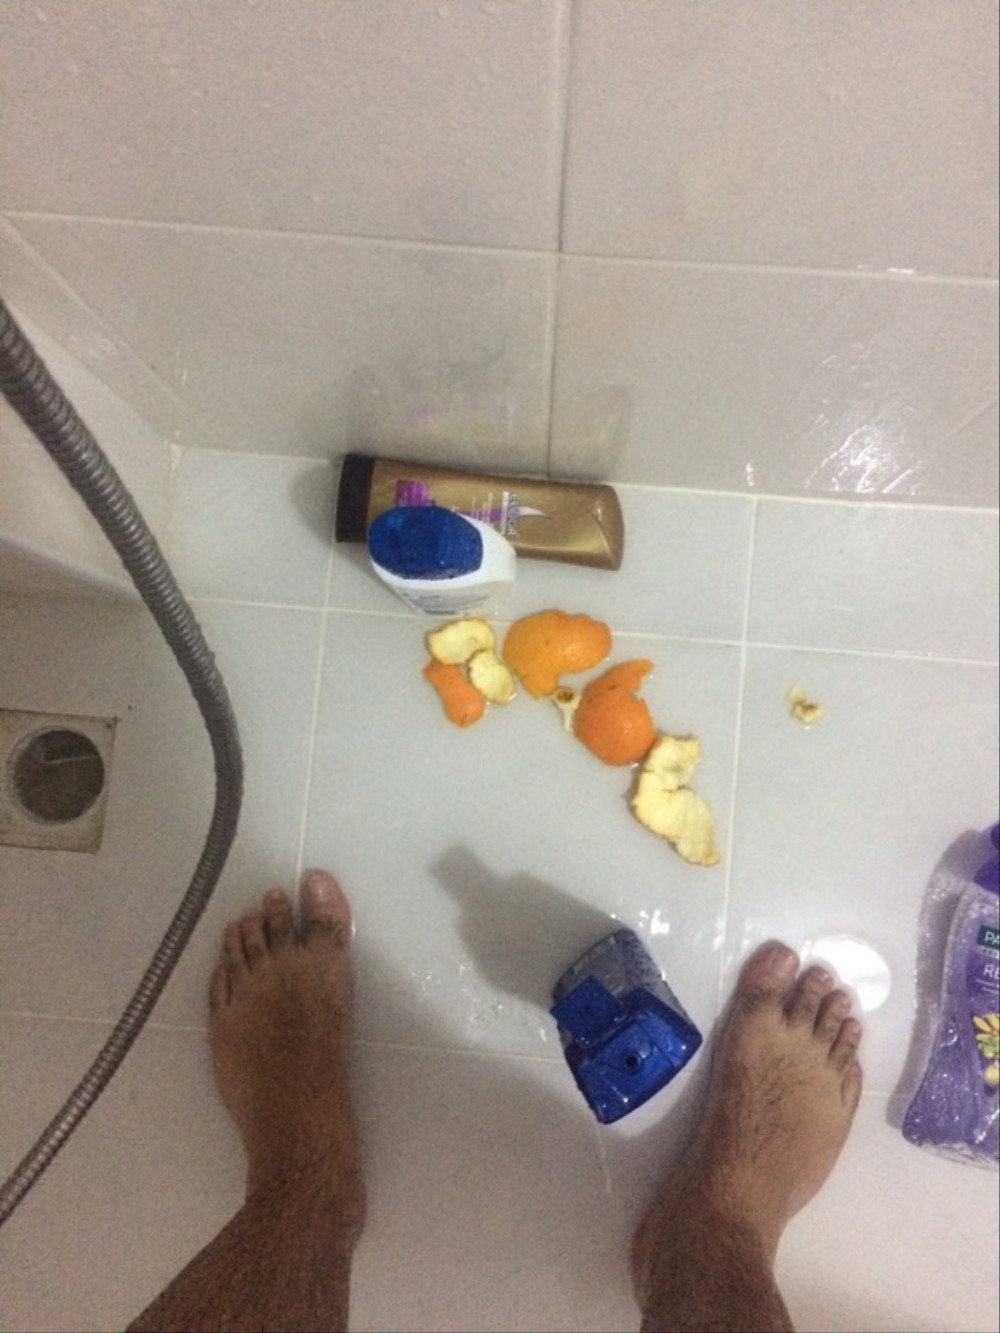 Eating Oranges In The Shower